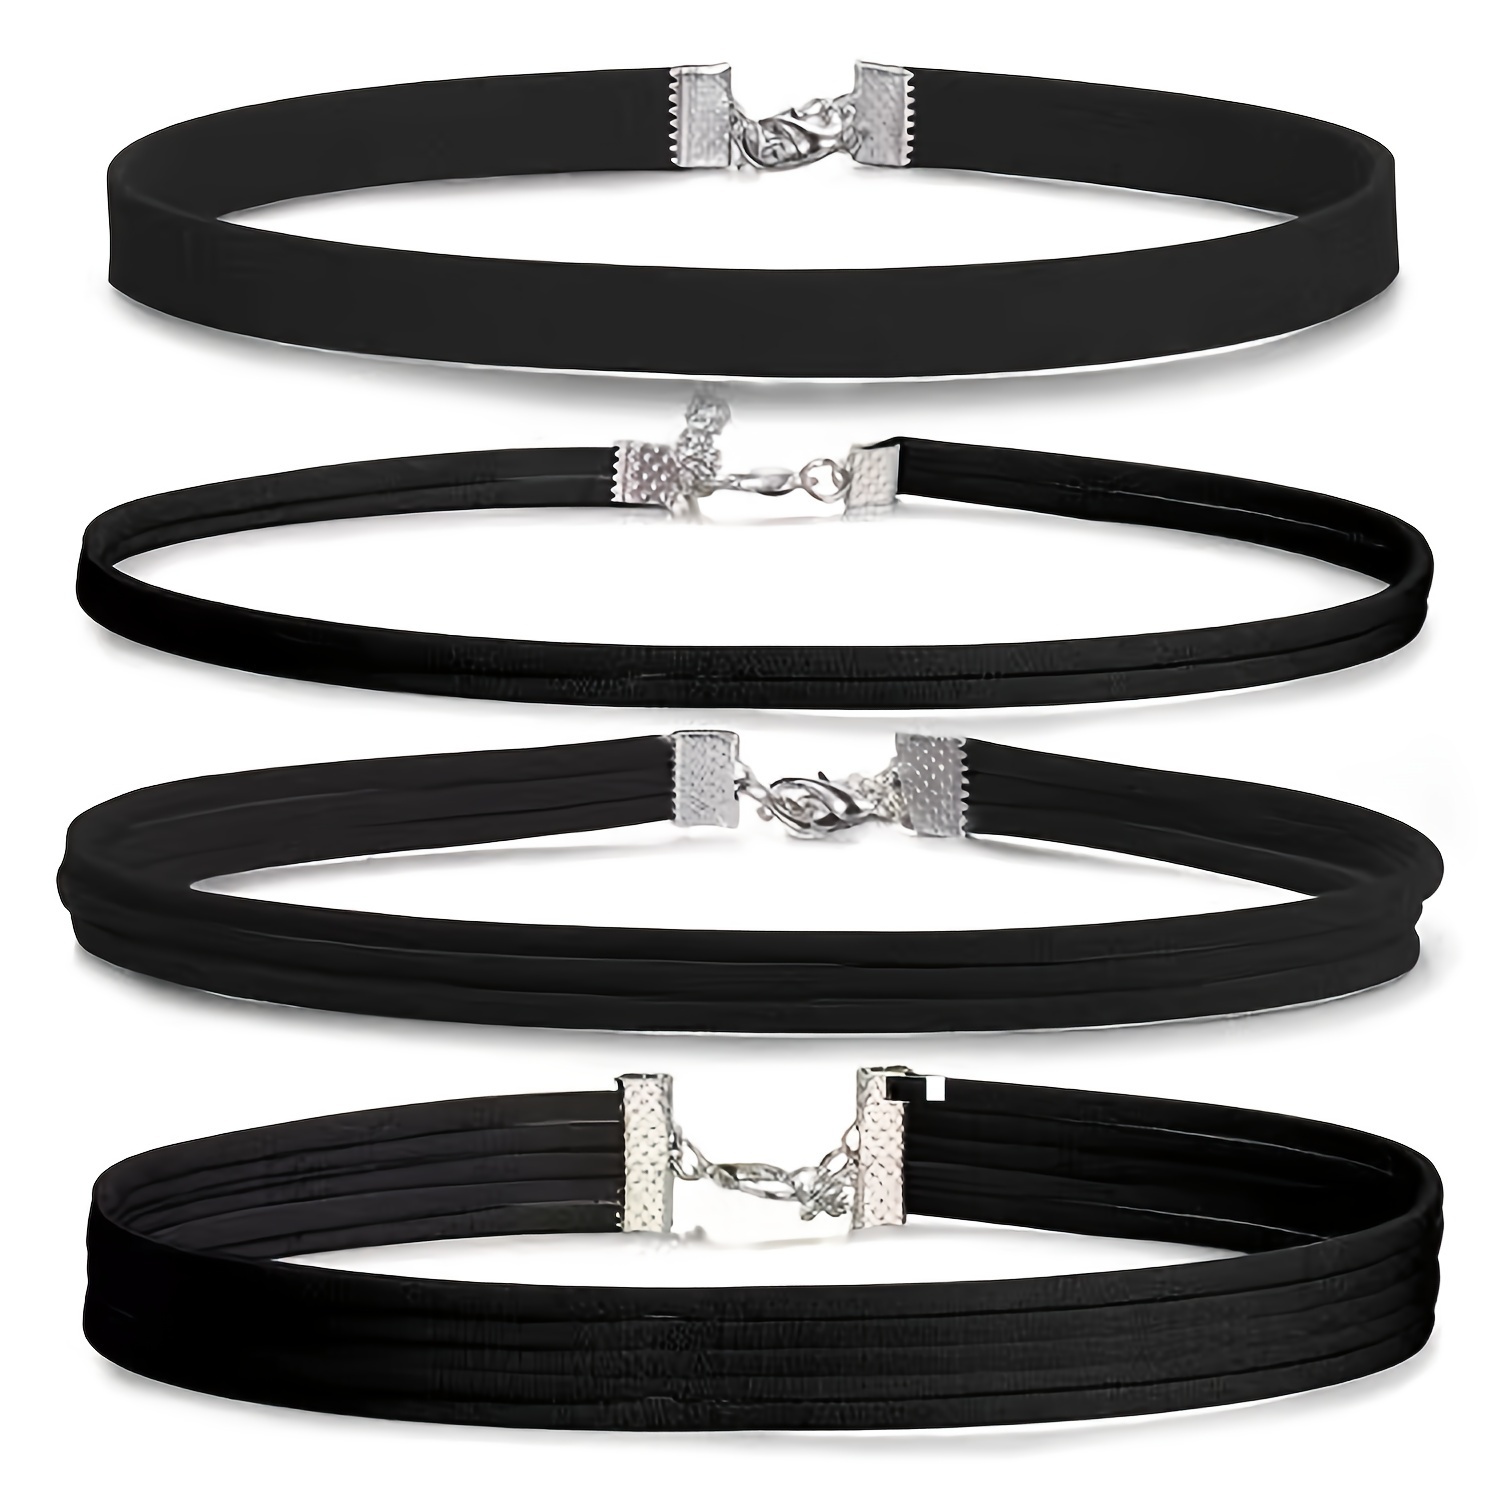 6pcs/Set Gothic Black Braided Choker Collar Necklaces Classic Choker For  Women Party Favors